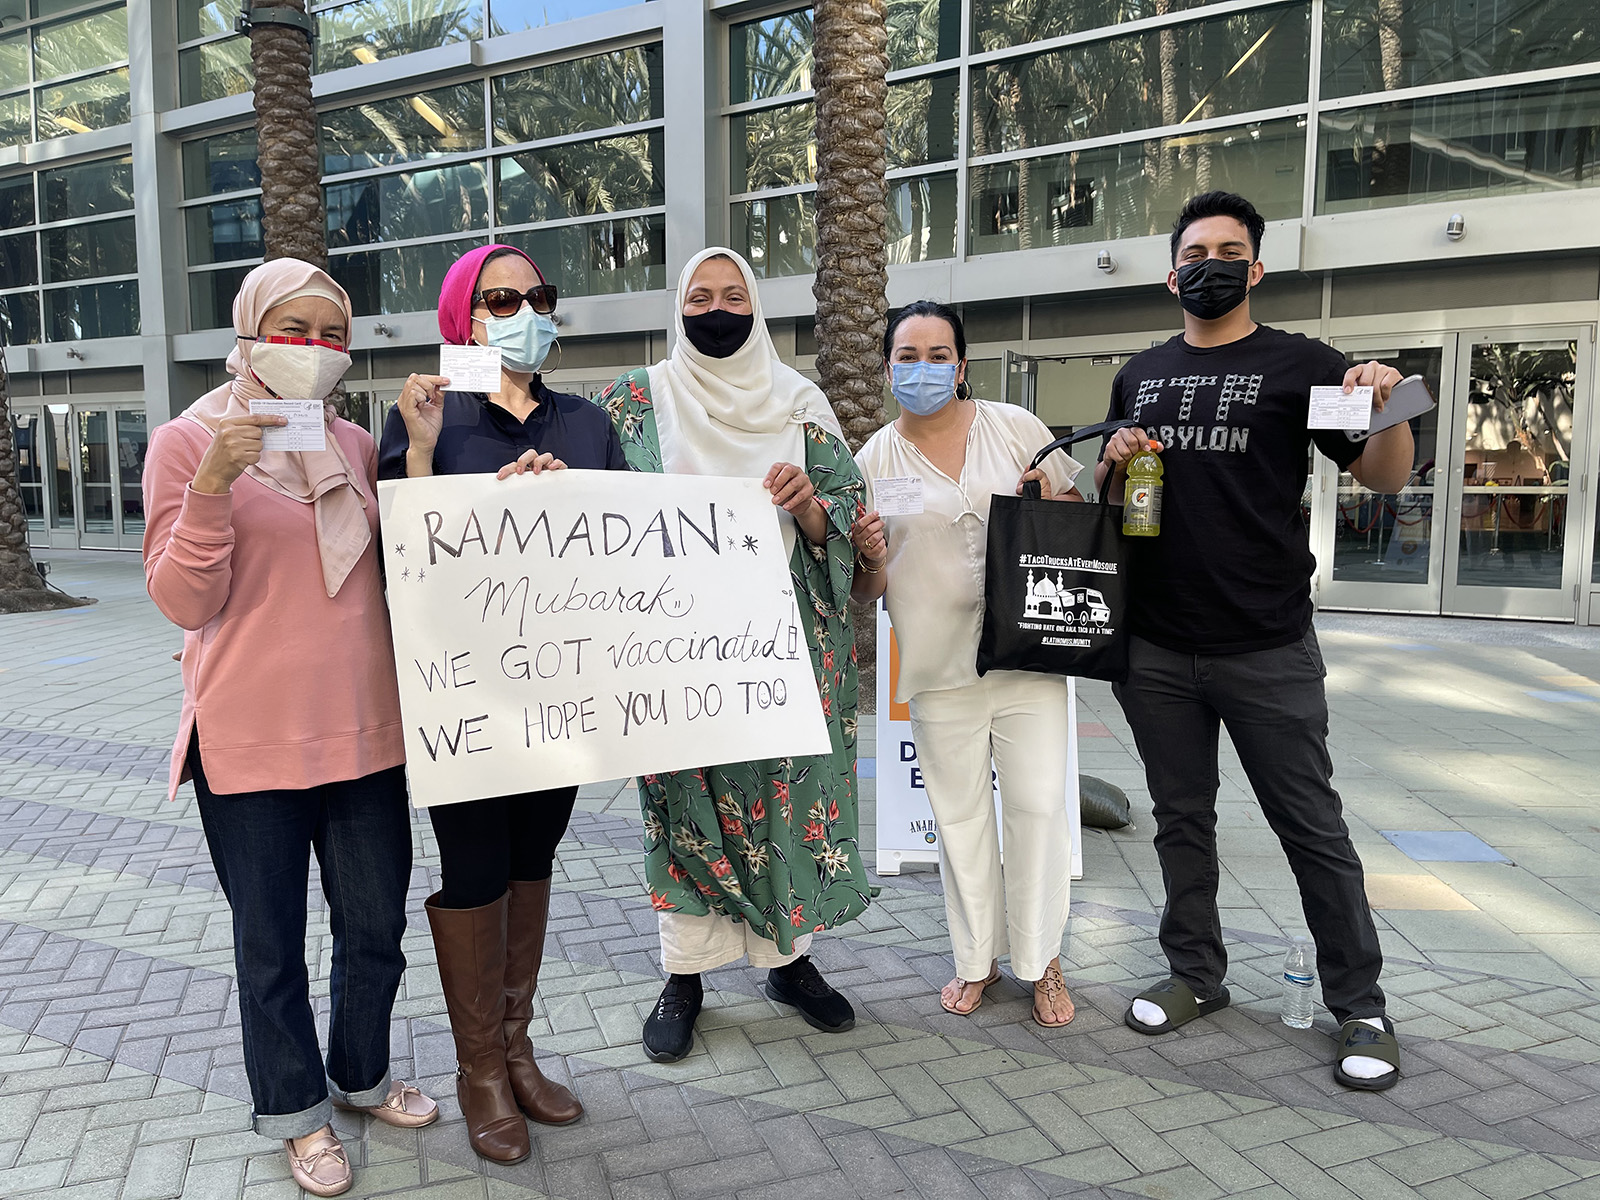 A group of Muslims display their vaccination cards and a sign reading “Ramadan Mubarak: We got vaccinated. We hope you do too,” on Sunday, April 11, 2021, at the Anaheim Convention Center in Anaheim, California. Rida Hamida, second from left, is the executive director of Latino & Muslim Unity. Photo courtesy of Latino & Muslim Unity